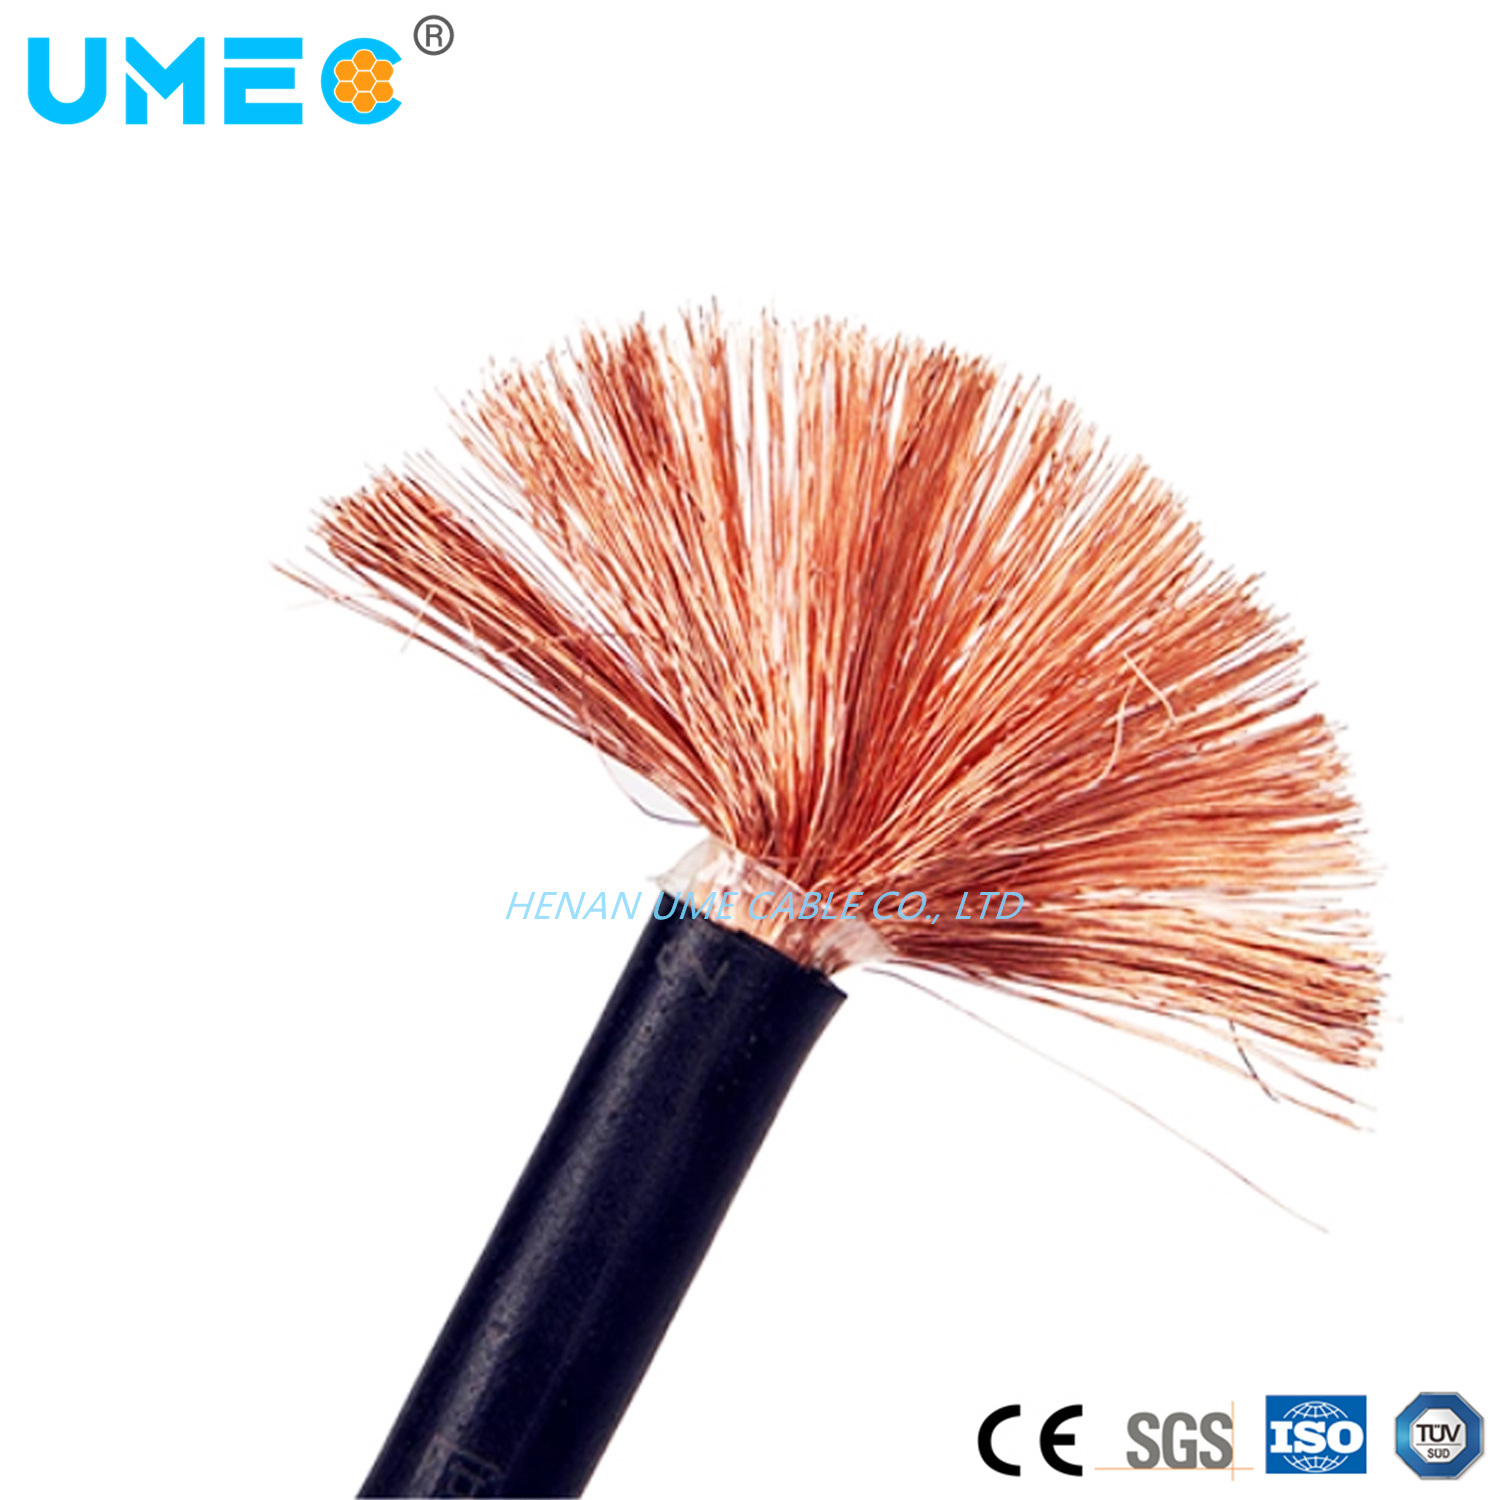 Fire Resistance Flexible Neoprene Welding Cable Single Copper Core 16mm 25mm 35mm 50mm 70mm 95mm Rubber Sheathed Welding Cable